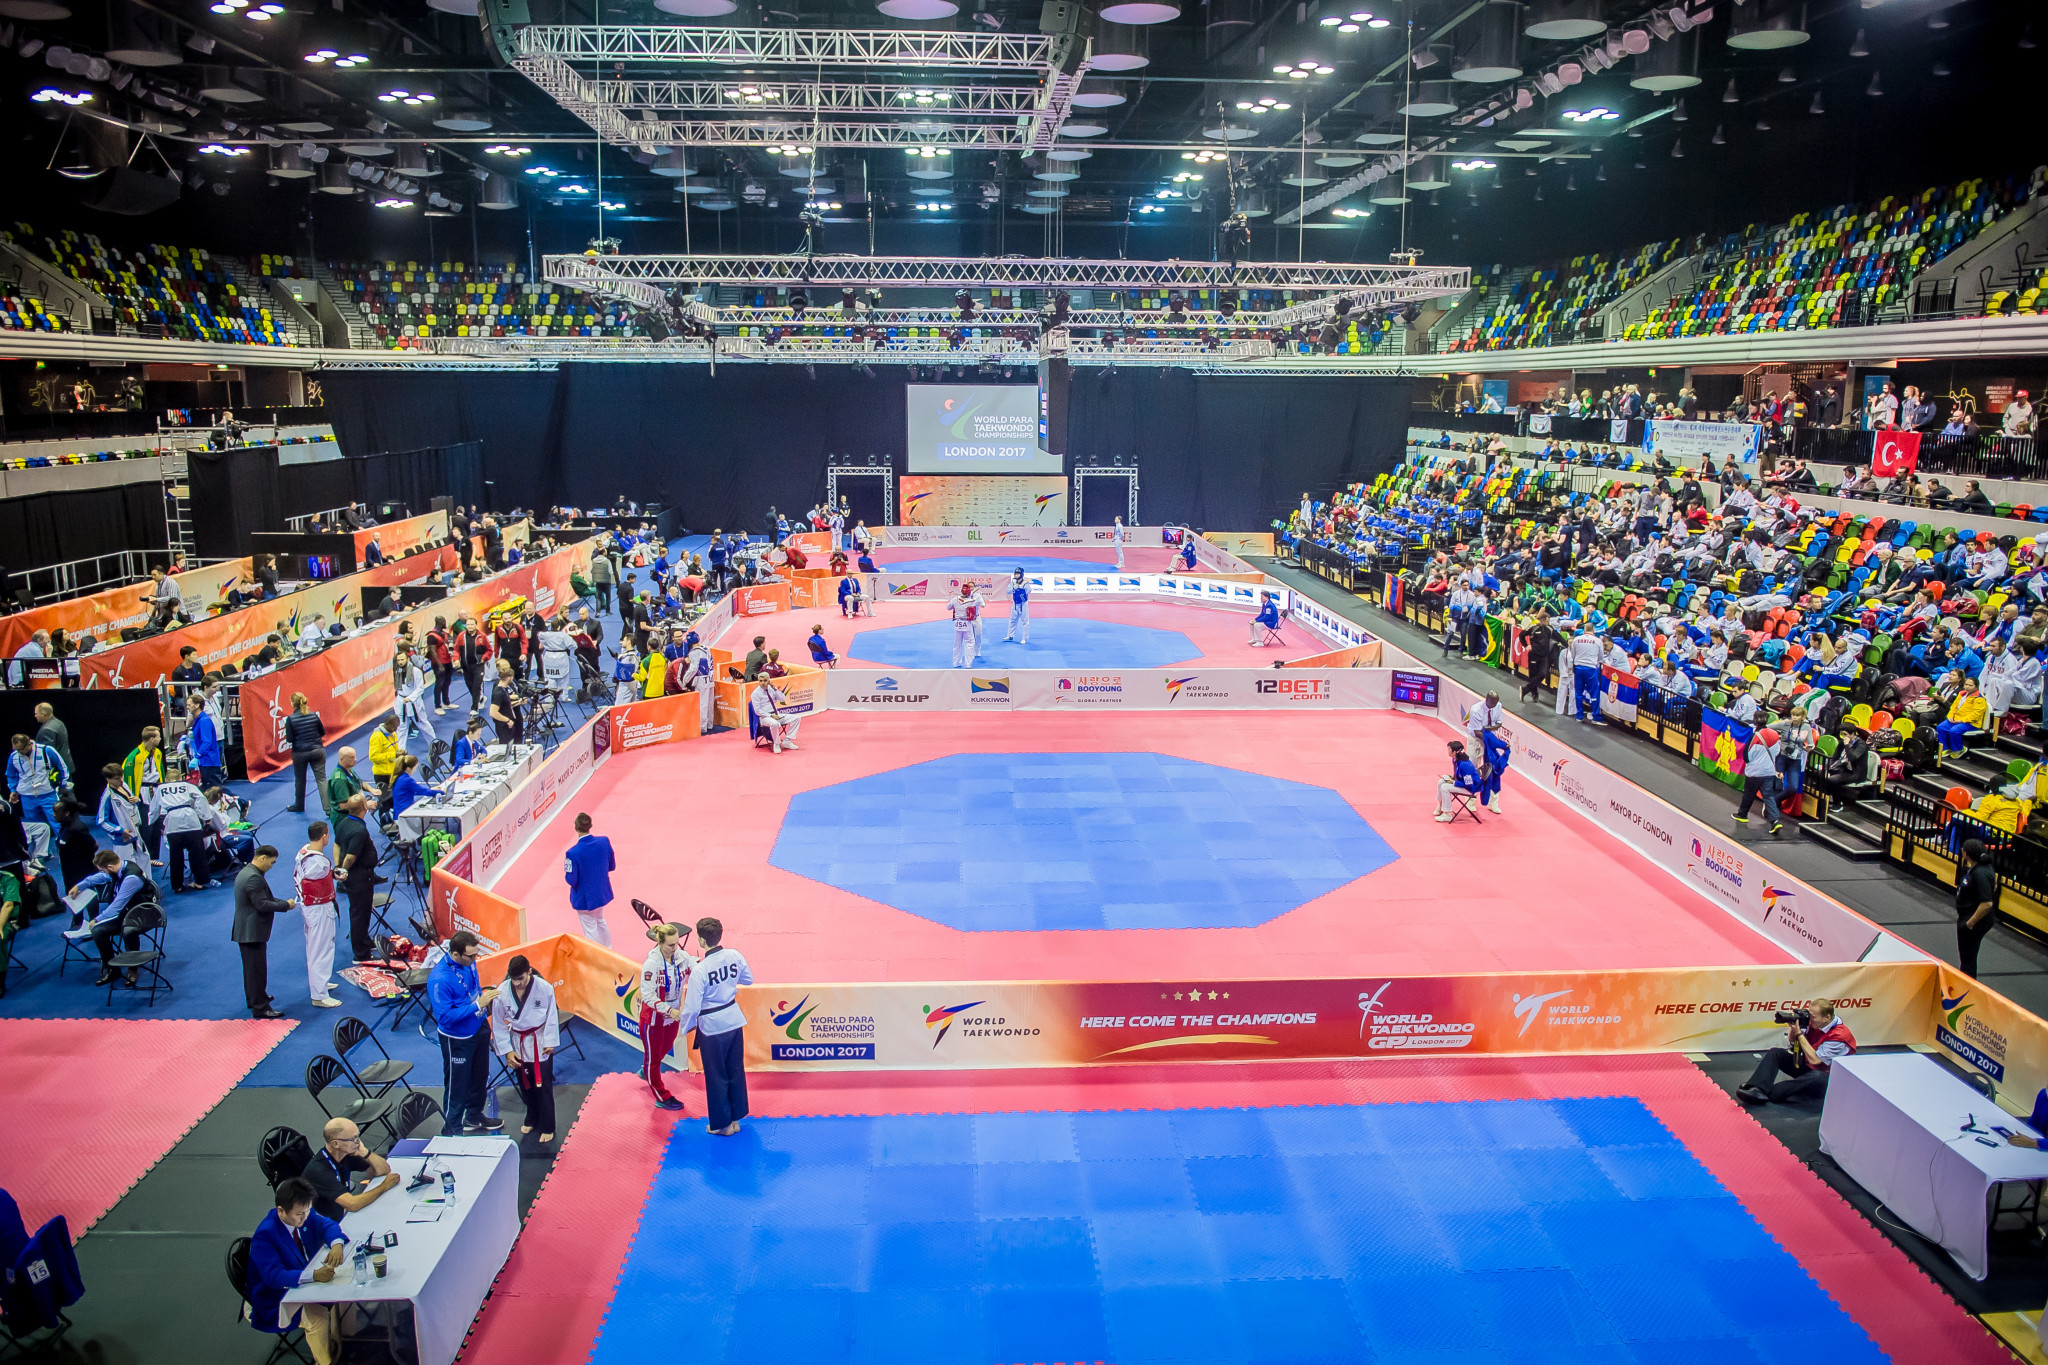 Action at the Copper Box Arena is due to continue tomorrow with the opening day of the World Taekwondo Grand Prix series event ©World Taekwondo